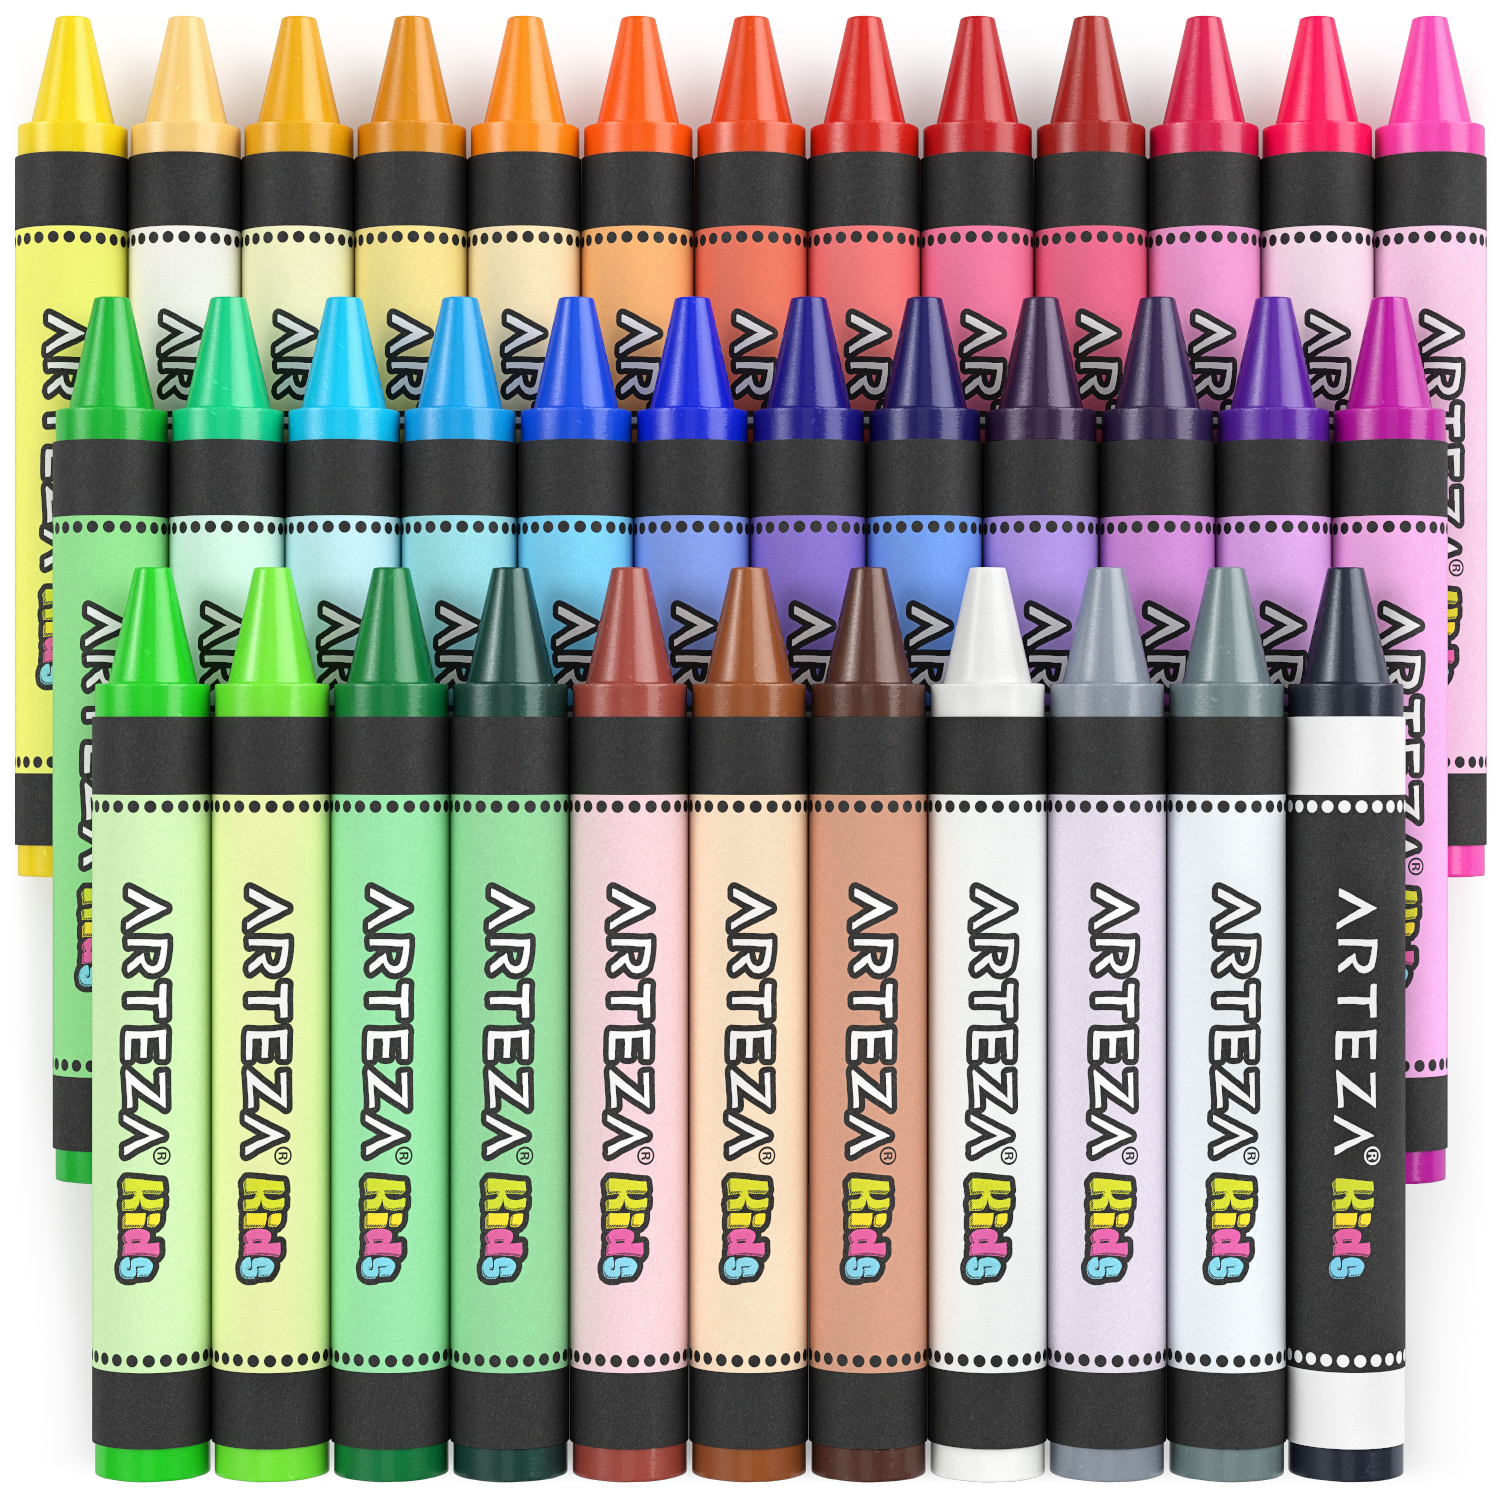 Best Deal for Arteza Kids Toddler Crayons in Bulk, 216 Count, 6 Packs of